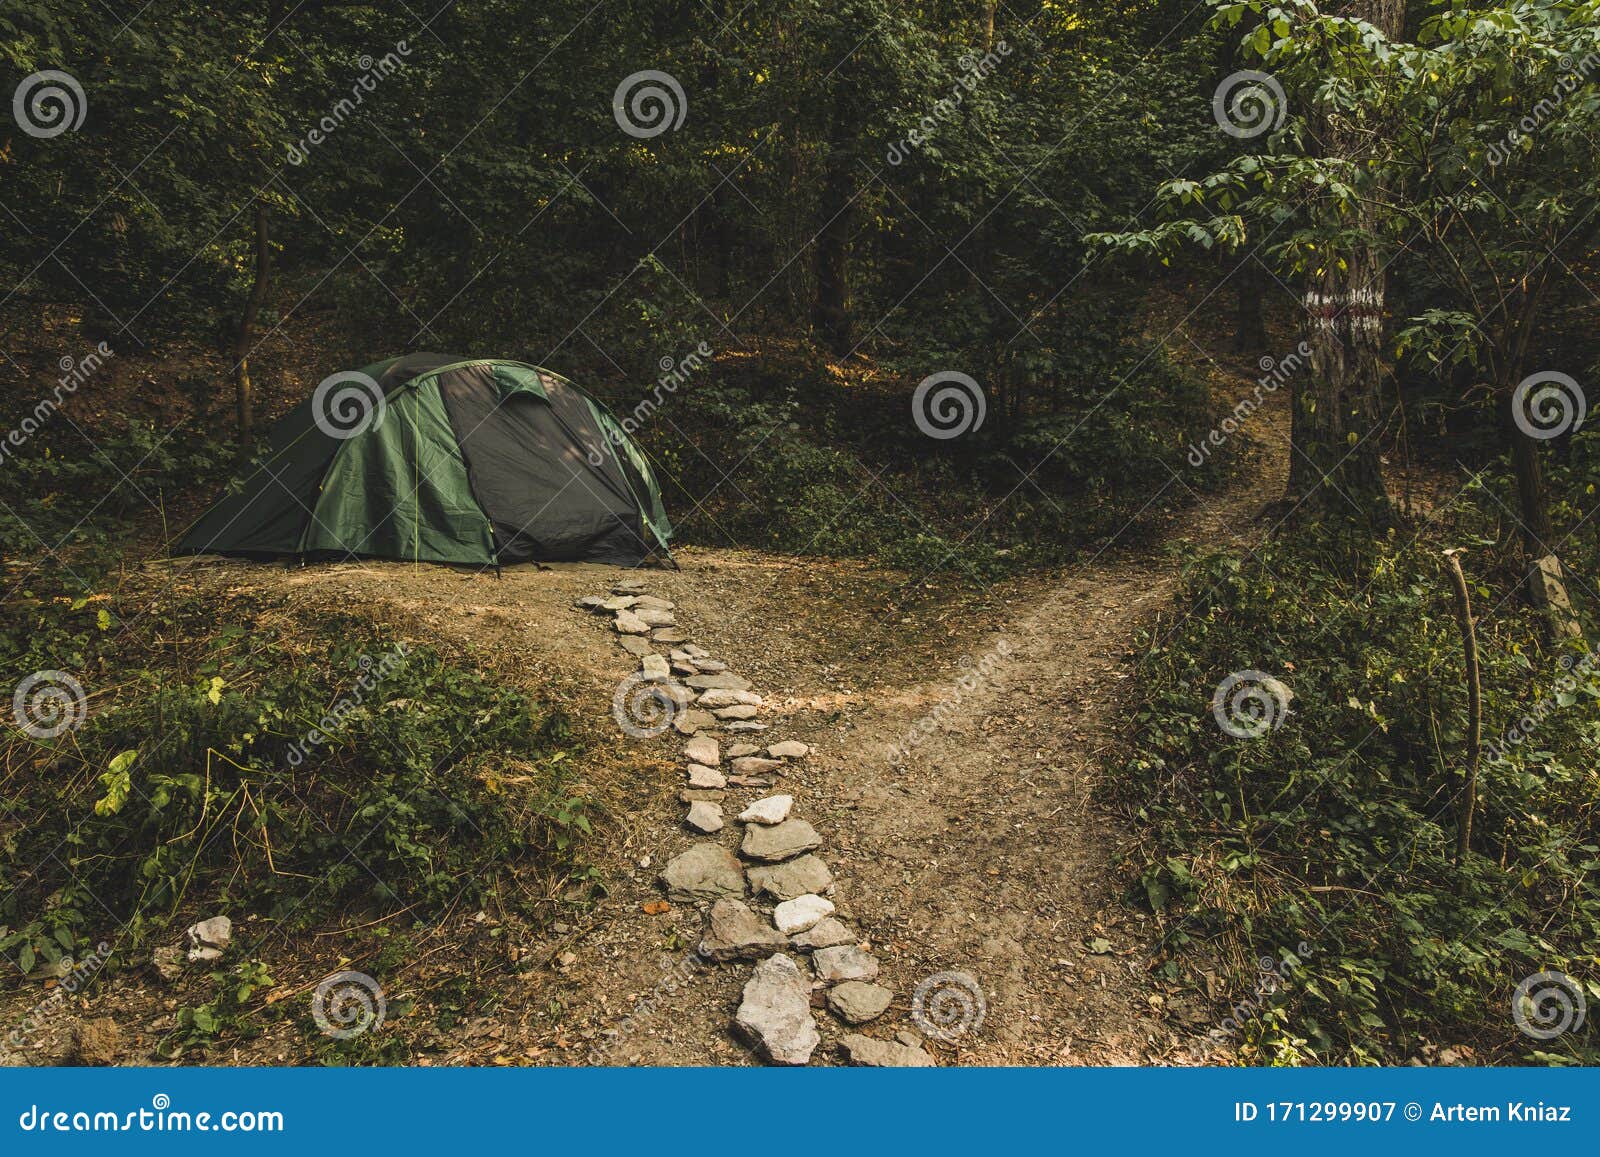 Door Pennenvriend baai Hiking Travel Life Style Passion Concept Picture of Tent Camp Side Place in  Forest Moody Nature Environment Green Foliage and Stock Image - Image of  adventure, pleasure: 171299907